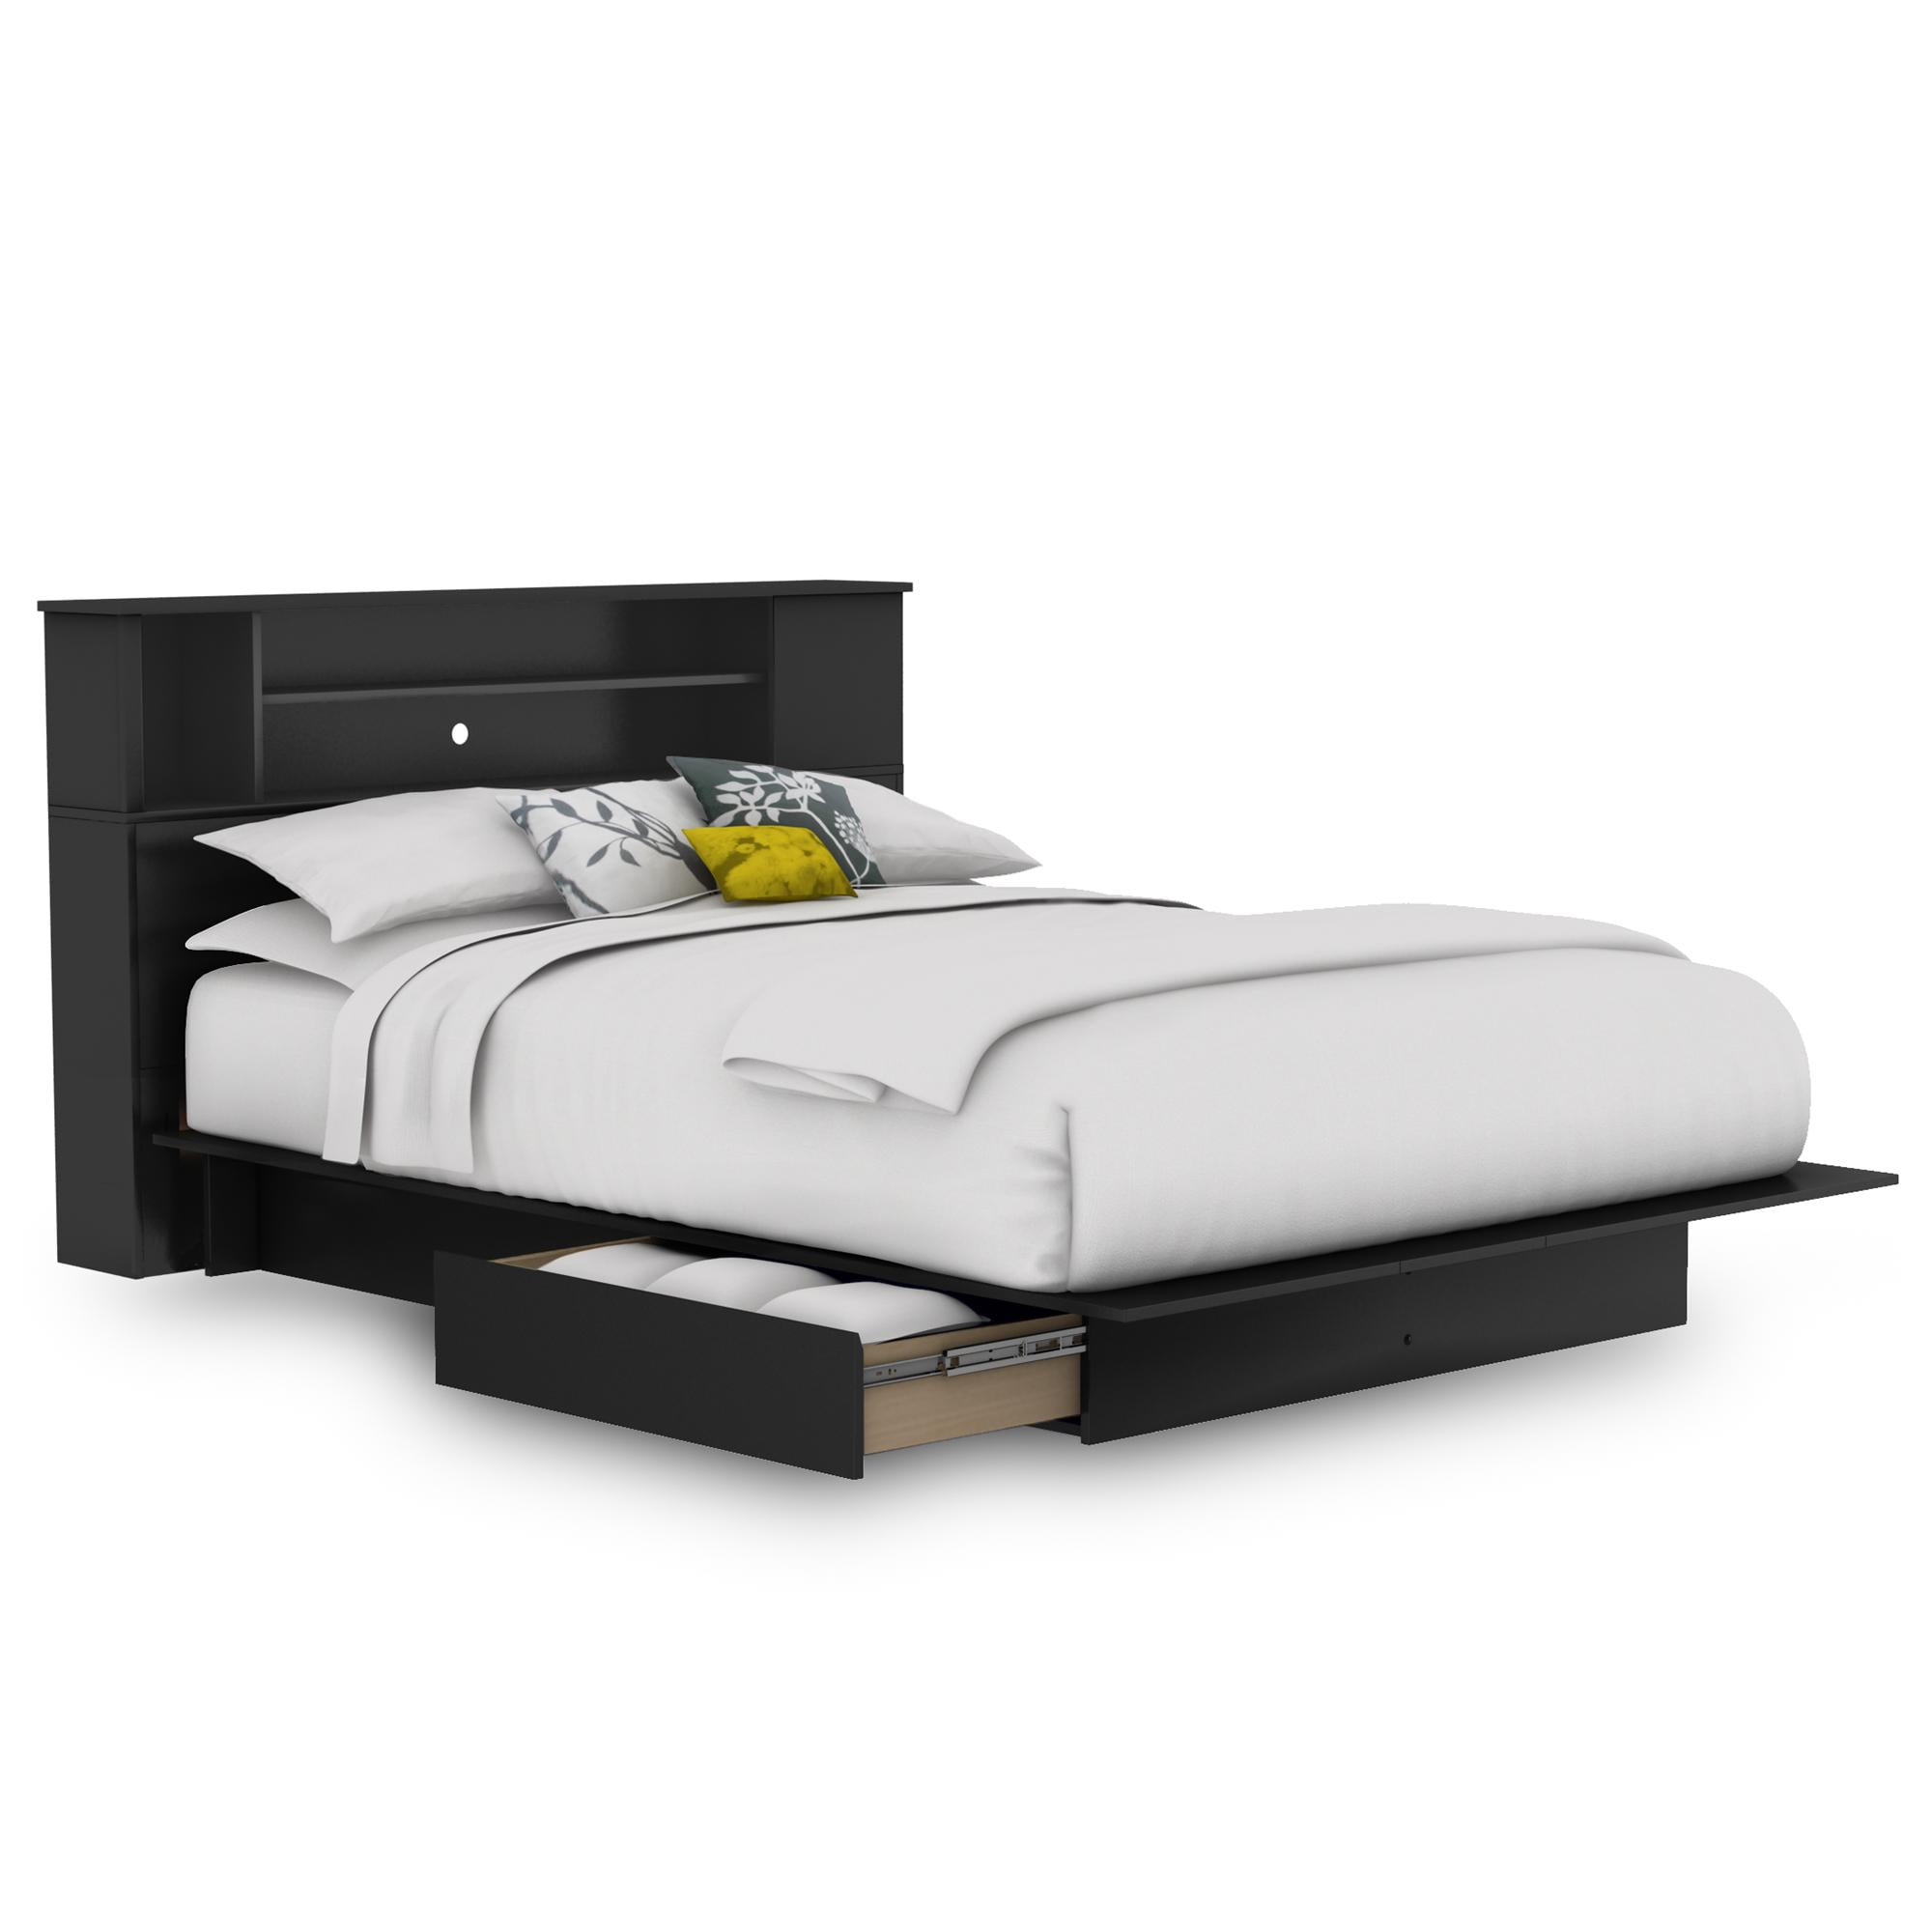 Vito Full Queen Platform Bed Bookcase, Queen Size Bed Frame With Storage And Bookcase Headboard